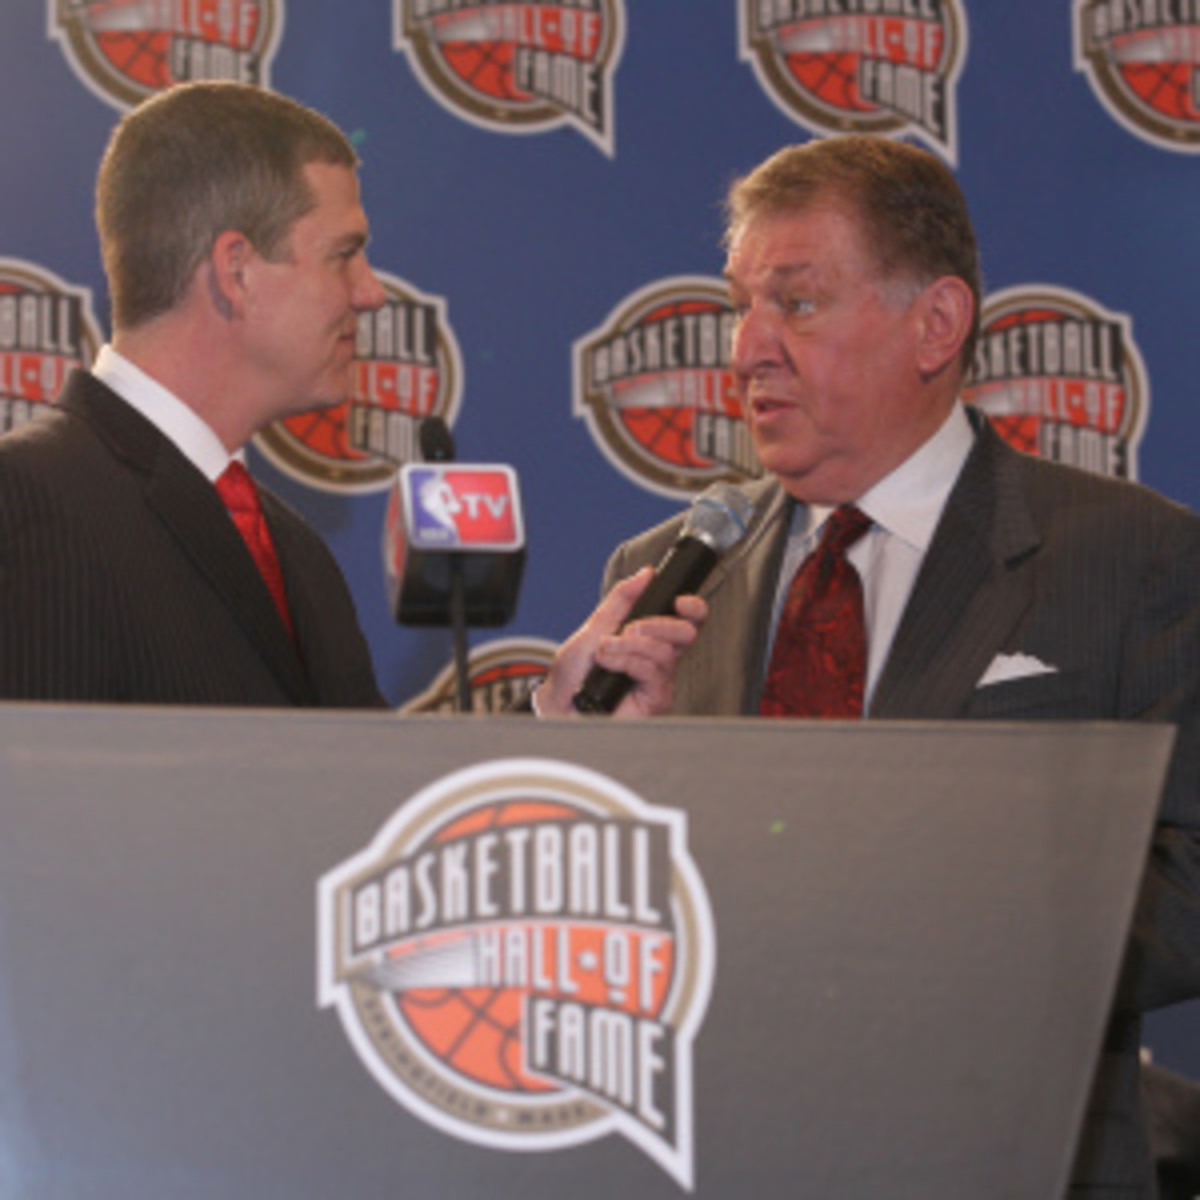 Giving fans a vote in the Basketball Hall of Fame selection is a high priority for Jerry Colangelo. (Jack Arent/Getty Images)